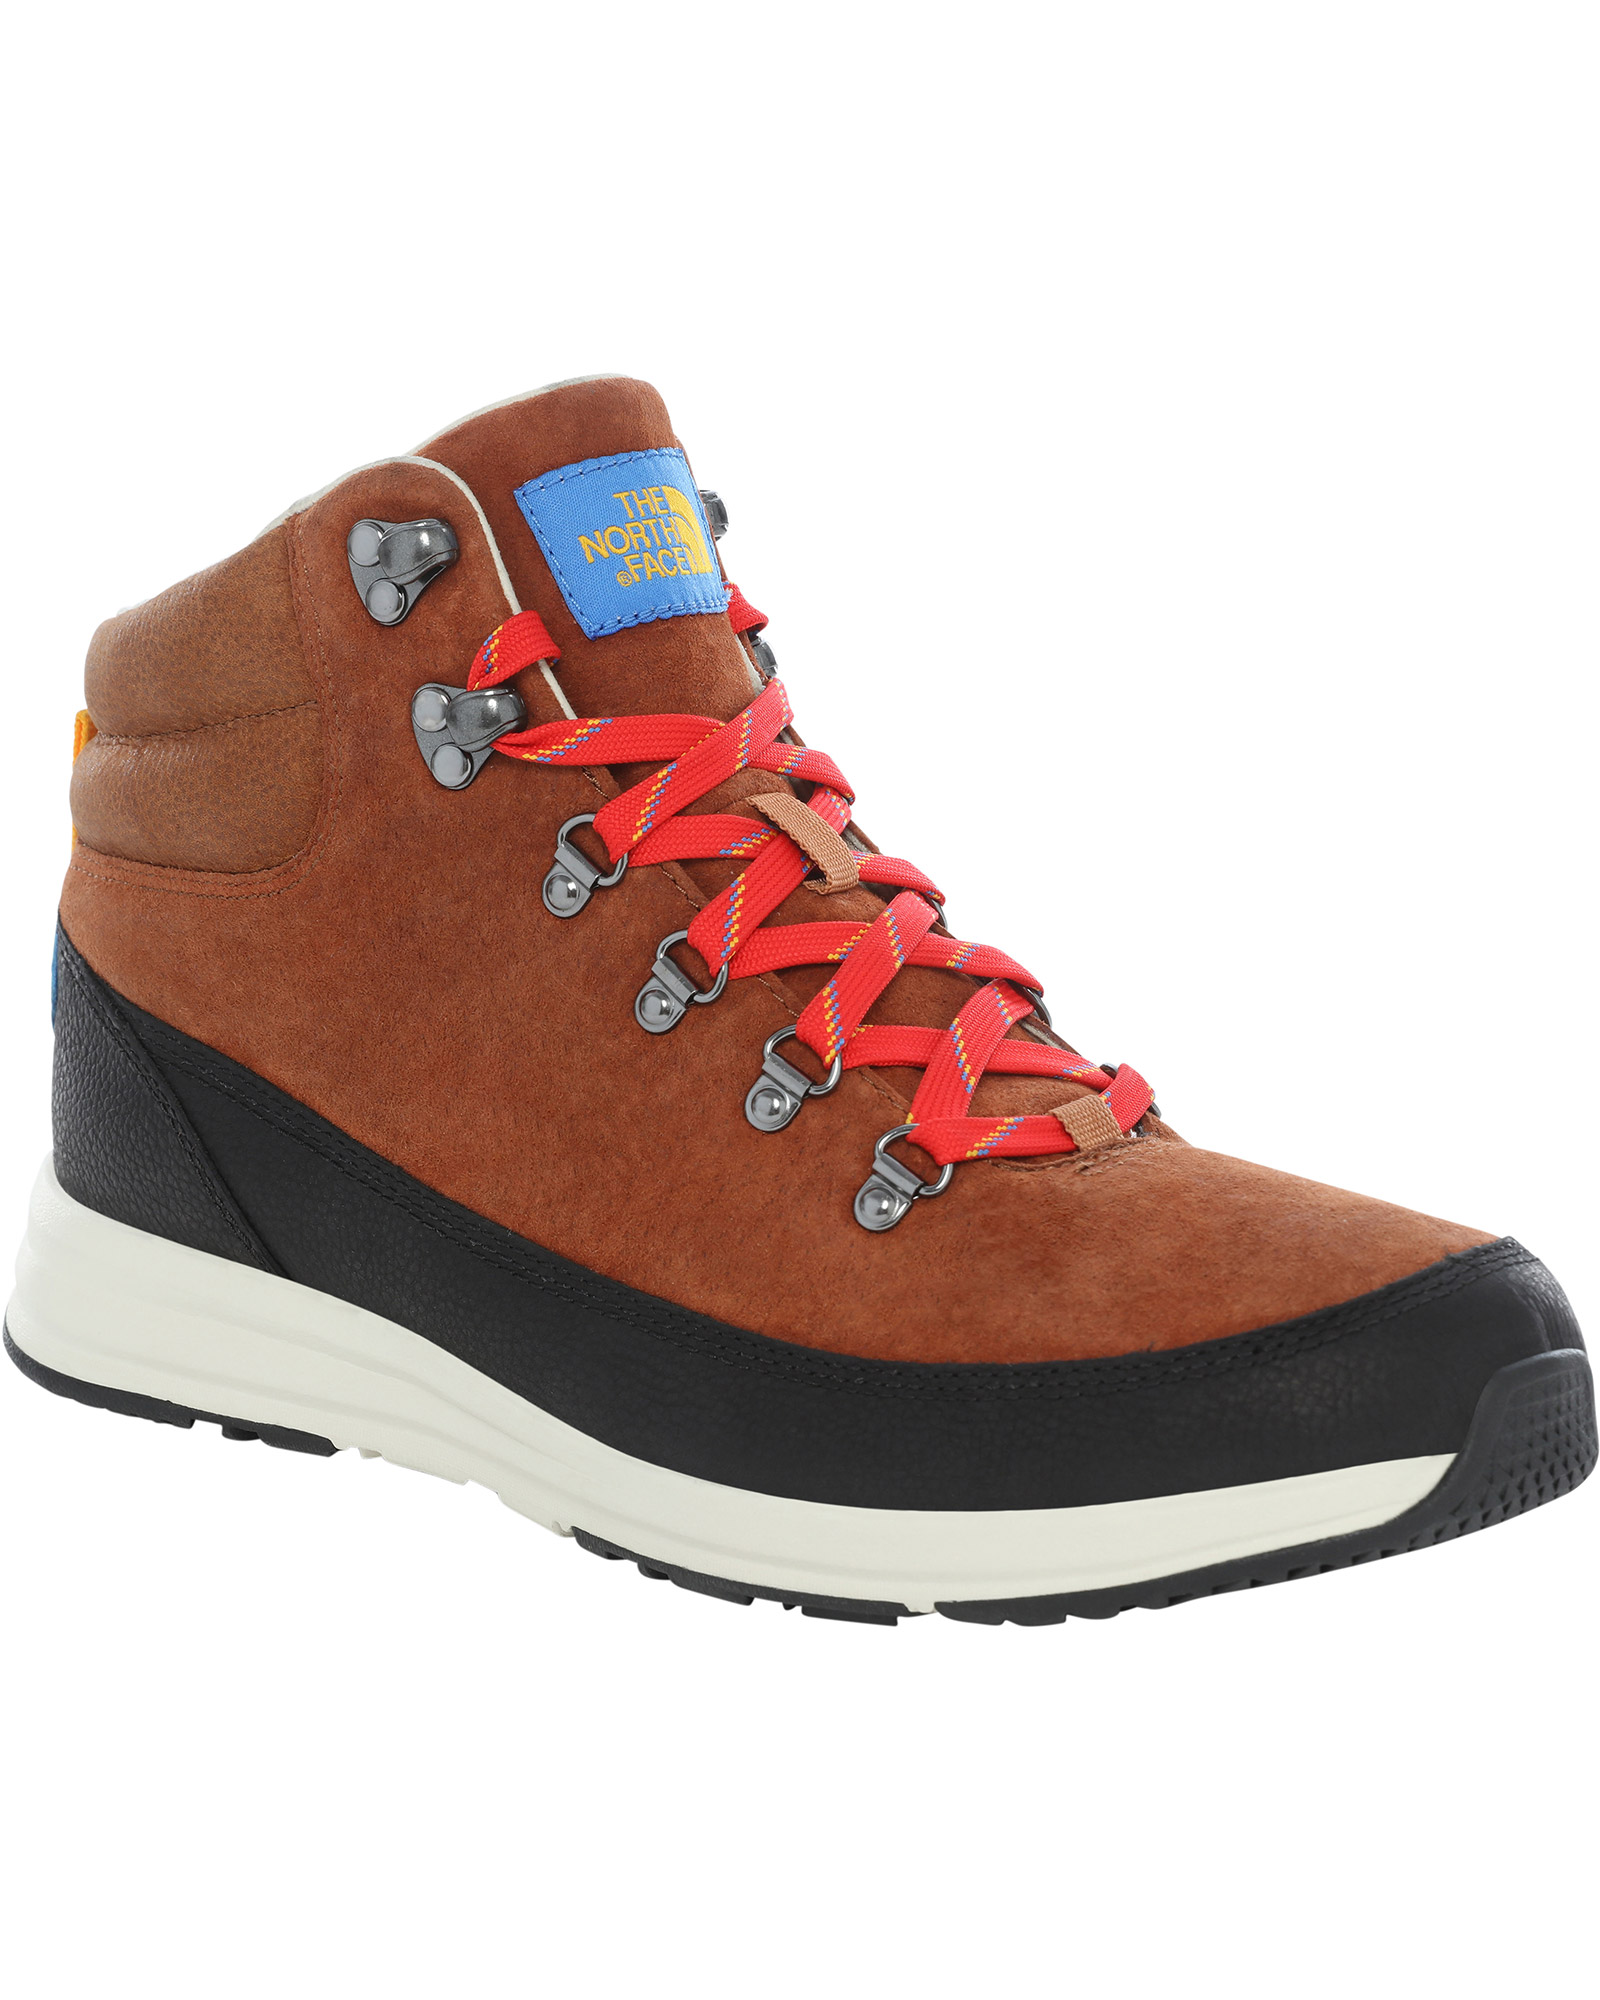 north face boots mens uk